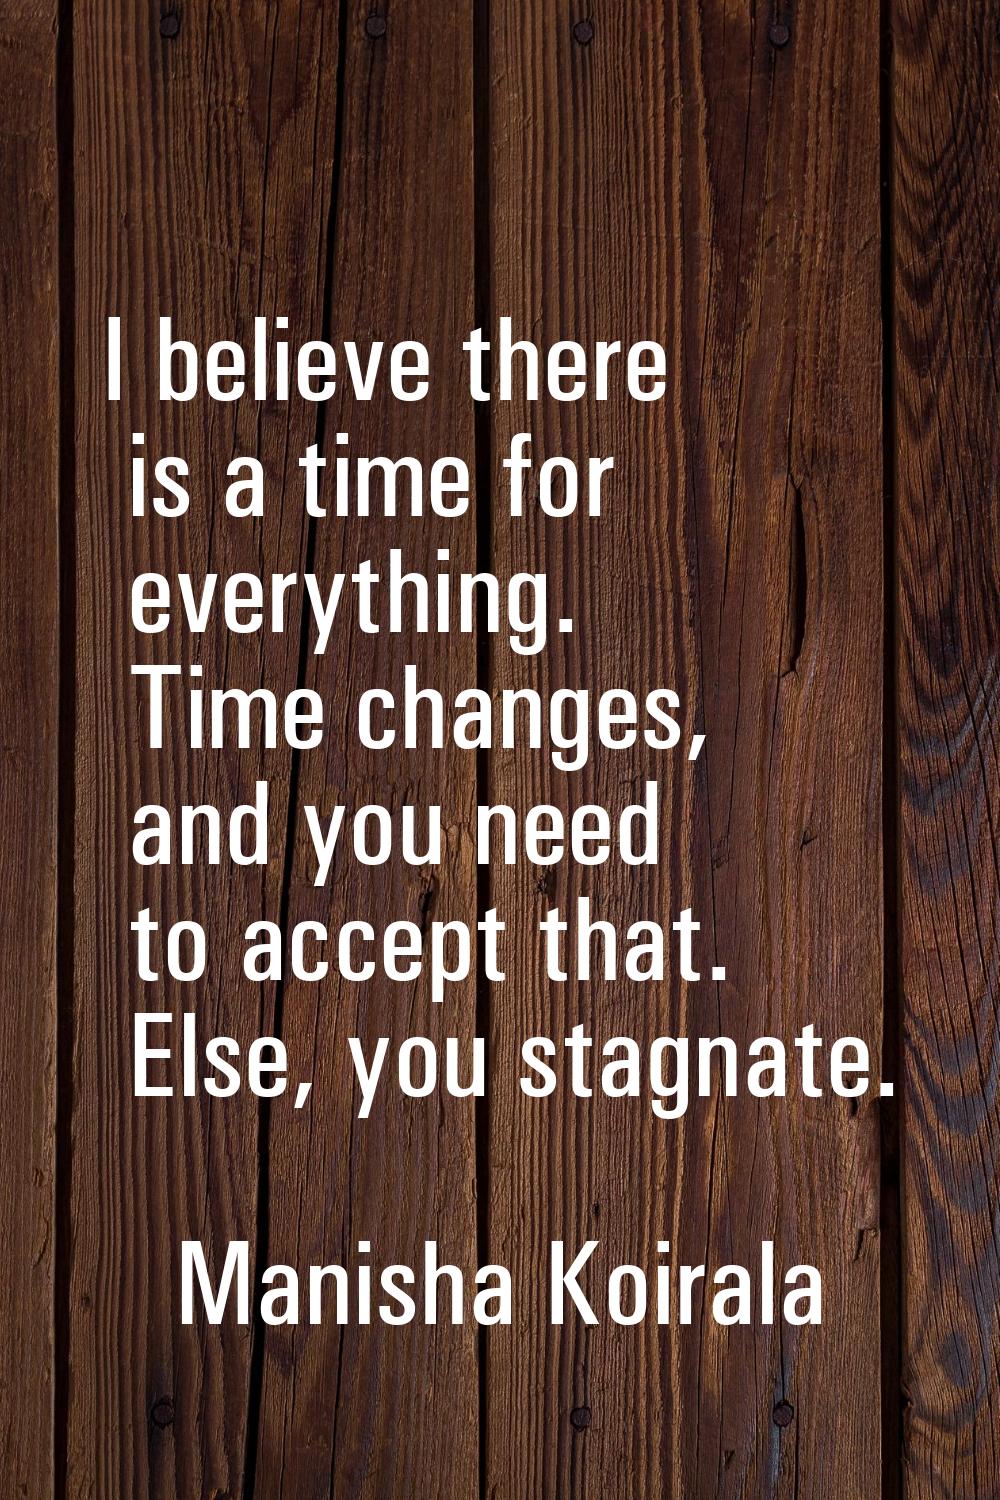 I believe there is a time for everything. Time changes, and you need to accept that. Else, you stag